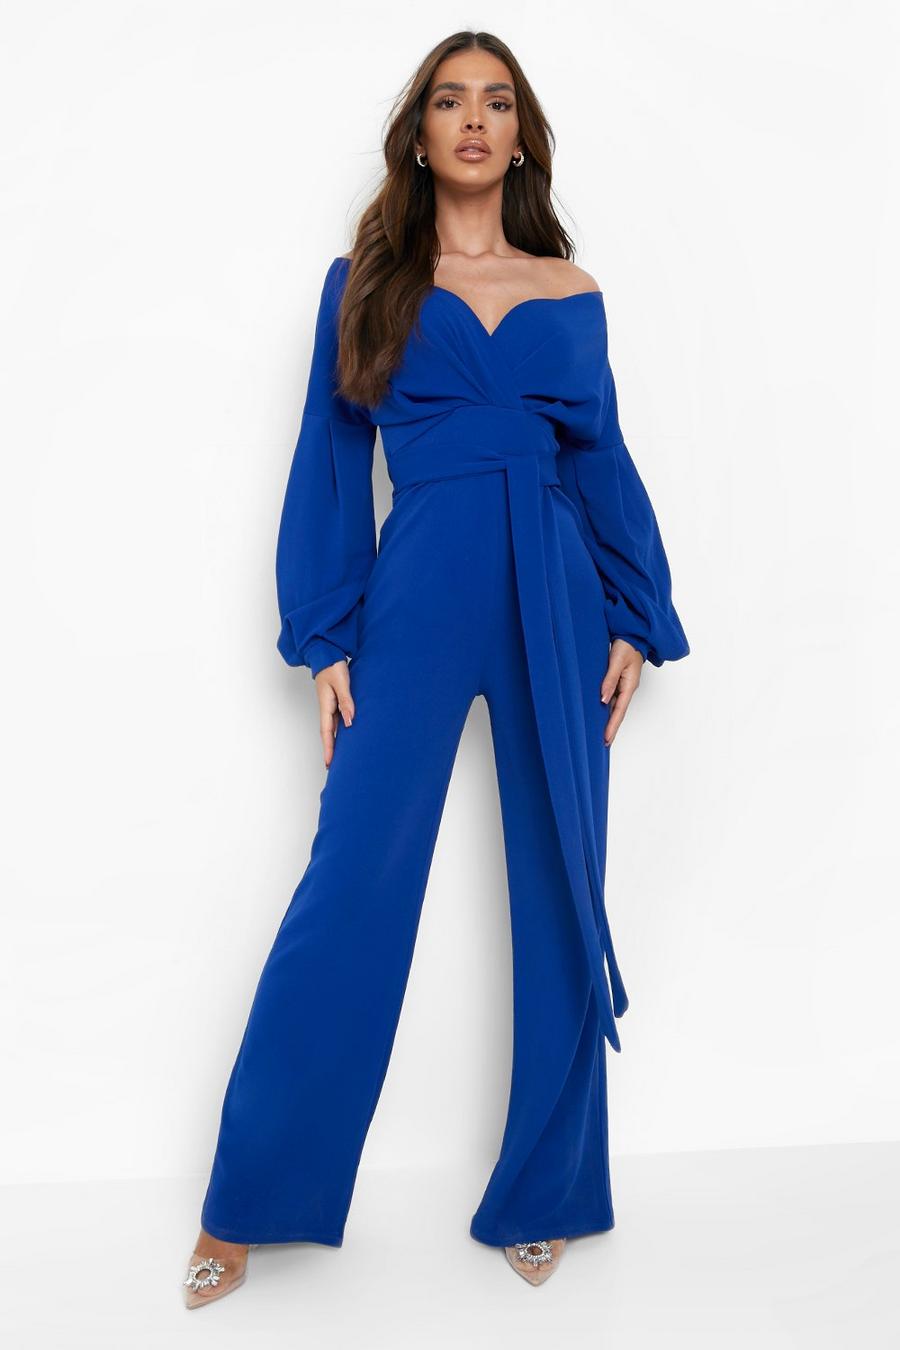 Royal Blue Satin Jumpsuit With High Collar And Long Sleeves For Prom,  Evening Party, And Floor Length Elegant Evening Trousers From Alegant_lady,  $113.38